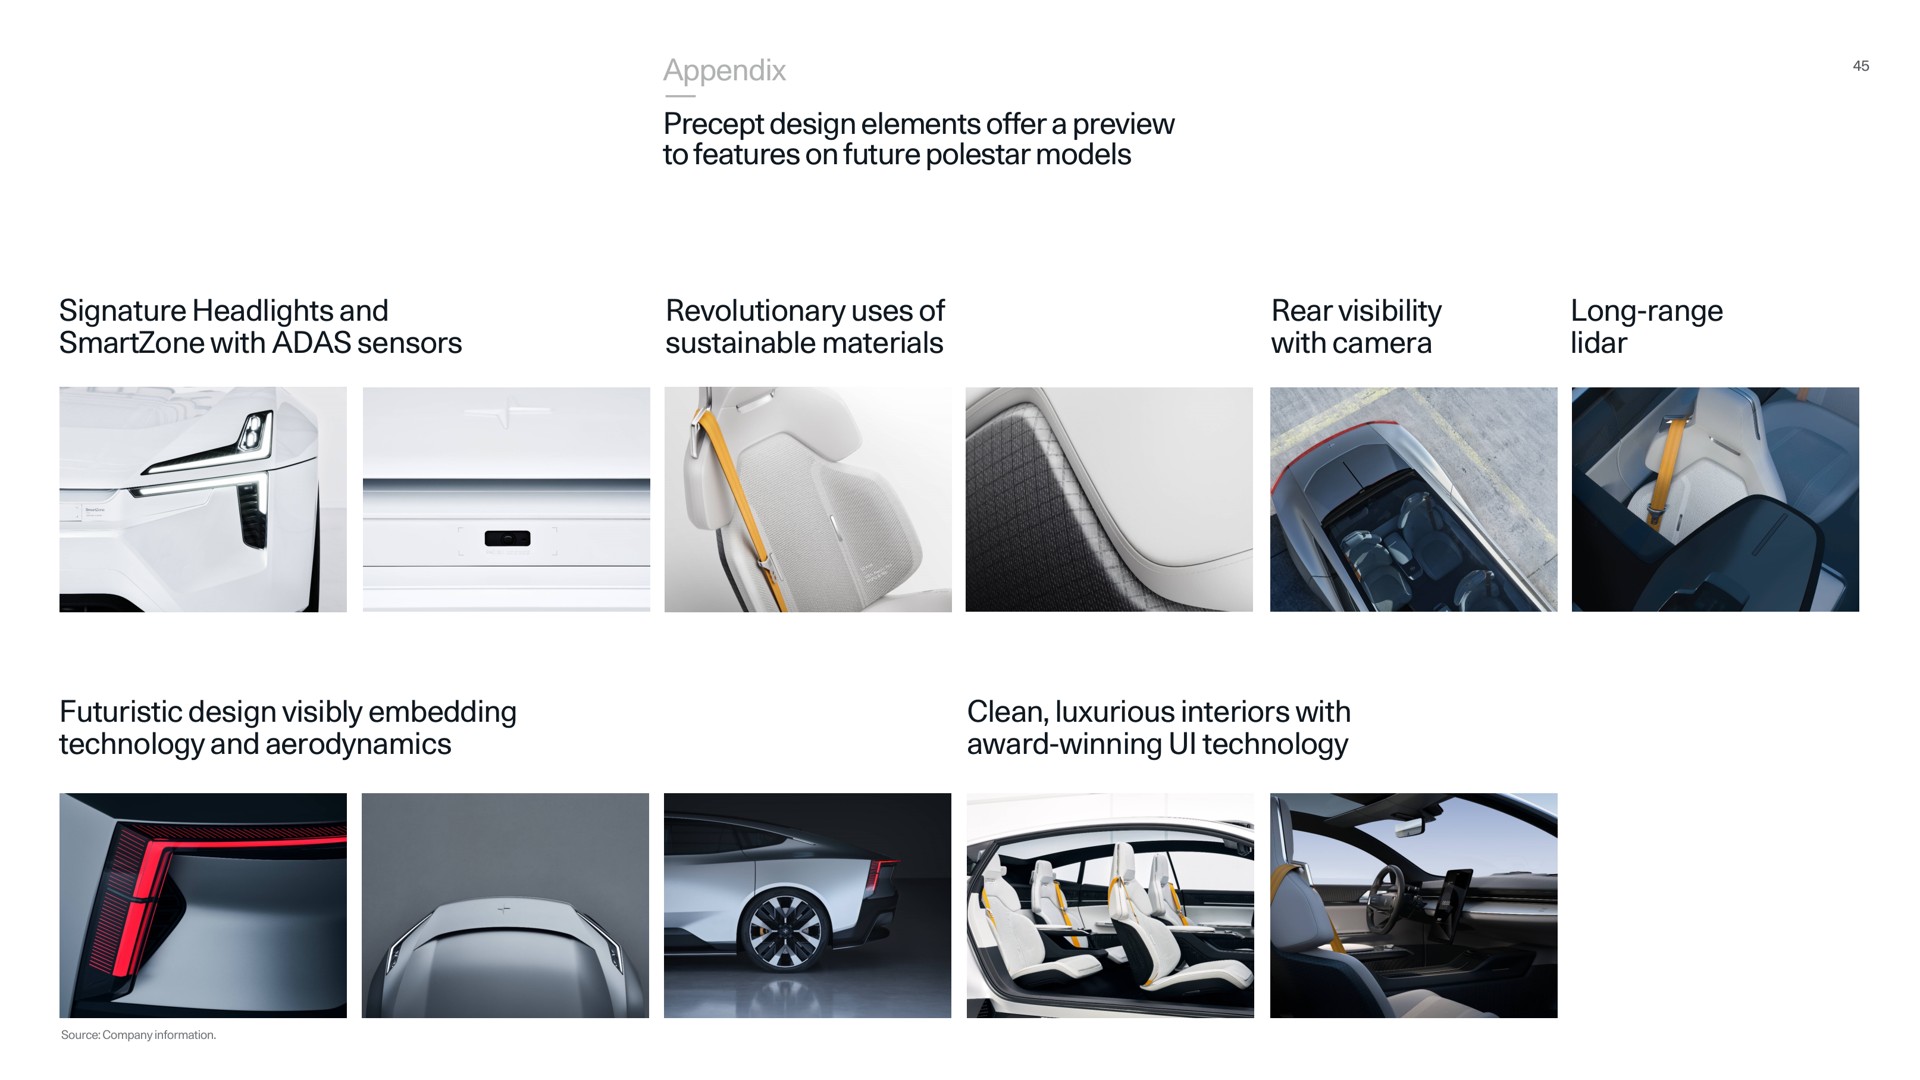 appendix precept design elements offer a preview to features on future polestar models signature headlights and with sensors revolutionary uses of sustainable materials rear visibility with camera long range futuristic design visibly embedding technology and aerodynamics clean luxurious interiors with award winning technology source company information | Polestar